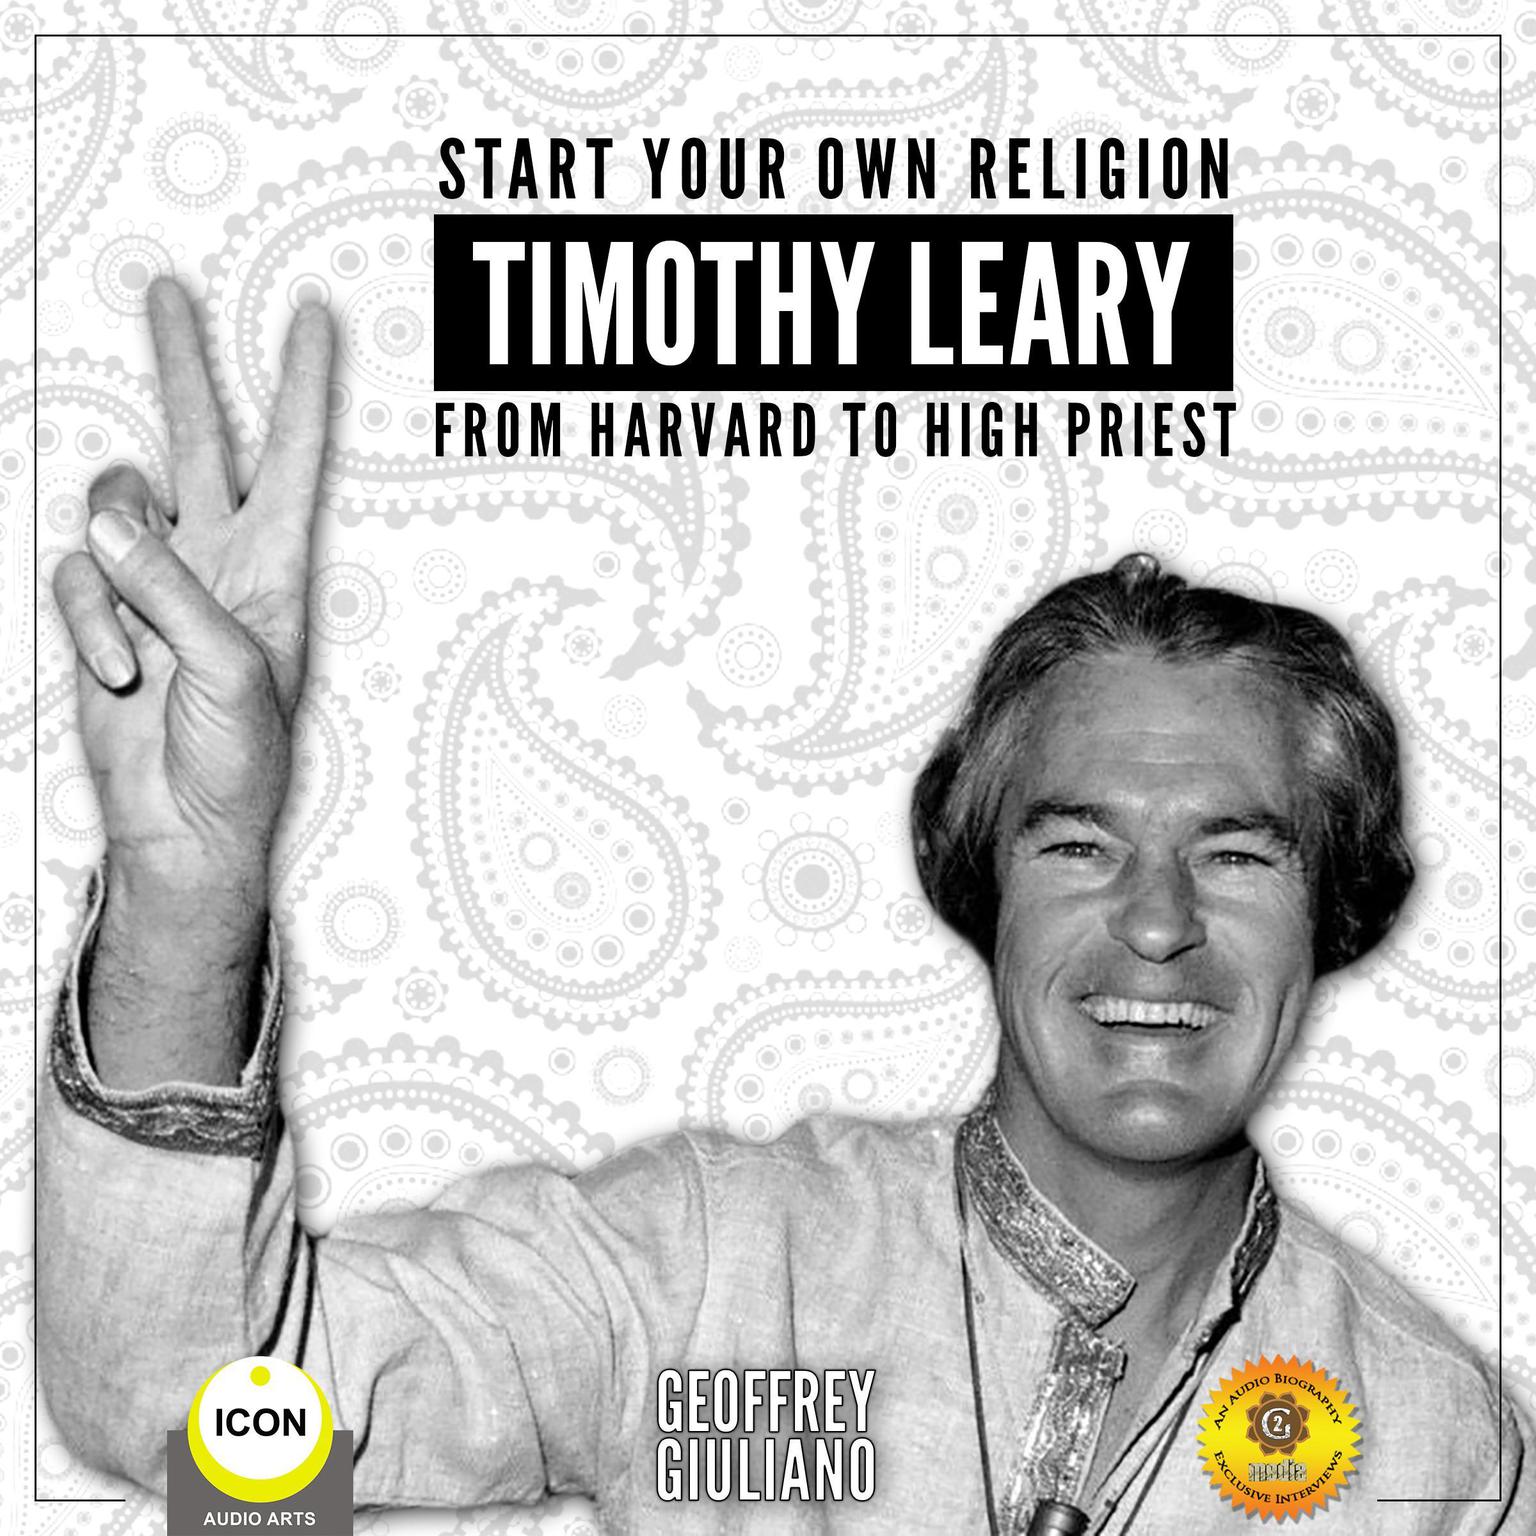 Start Your Own Religion Timothy Leary - From Harvard to High Priest Audiobook, by Geoffrey Giuliano